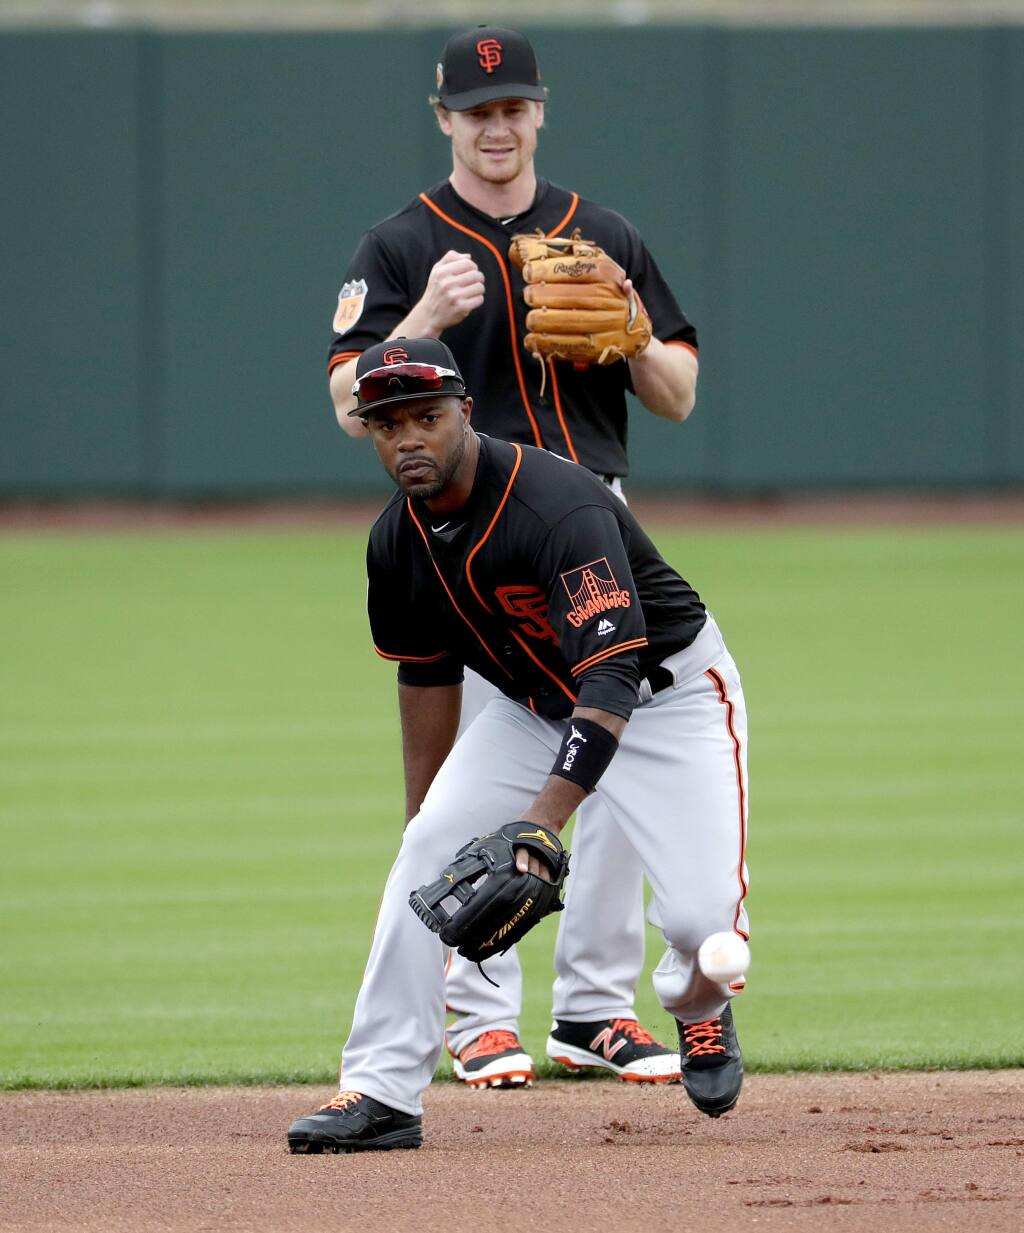 MLB: Jimmy Rollins reflects on decline of Black players in baseball